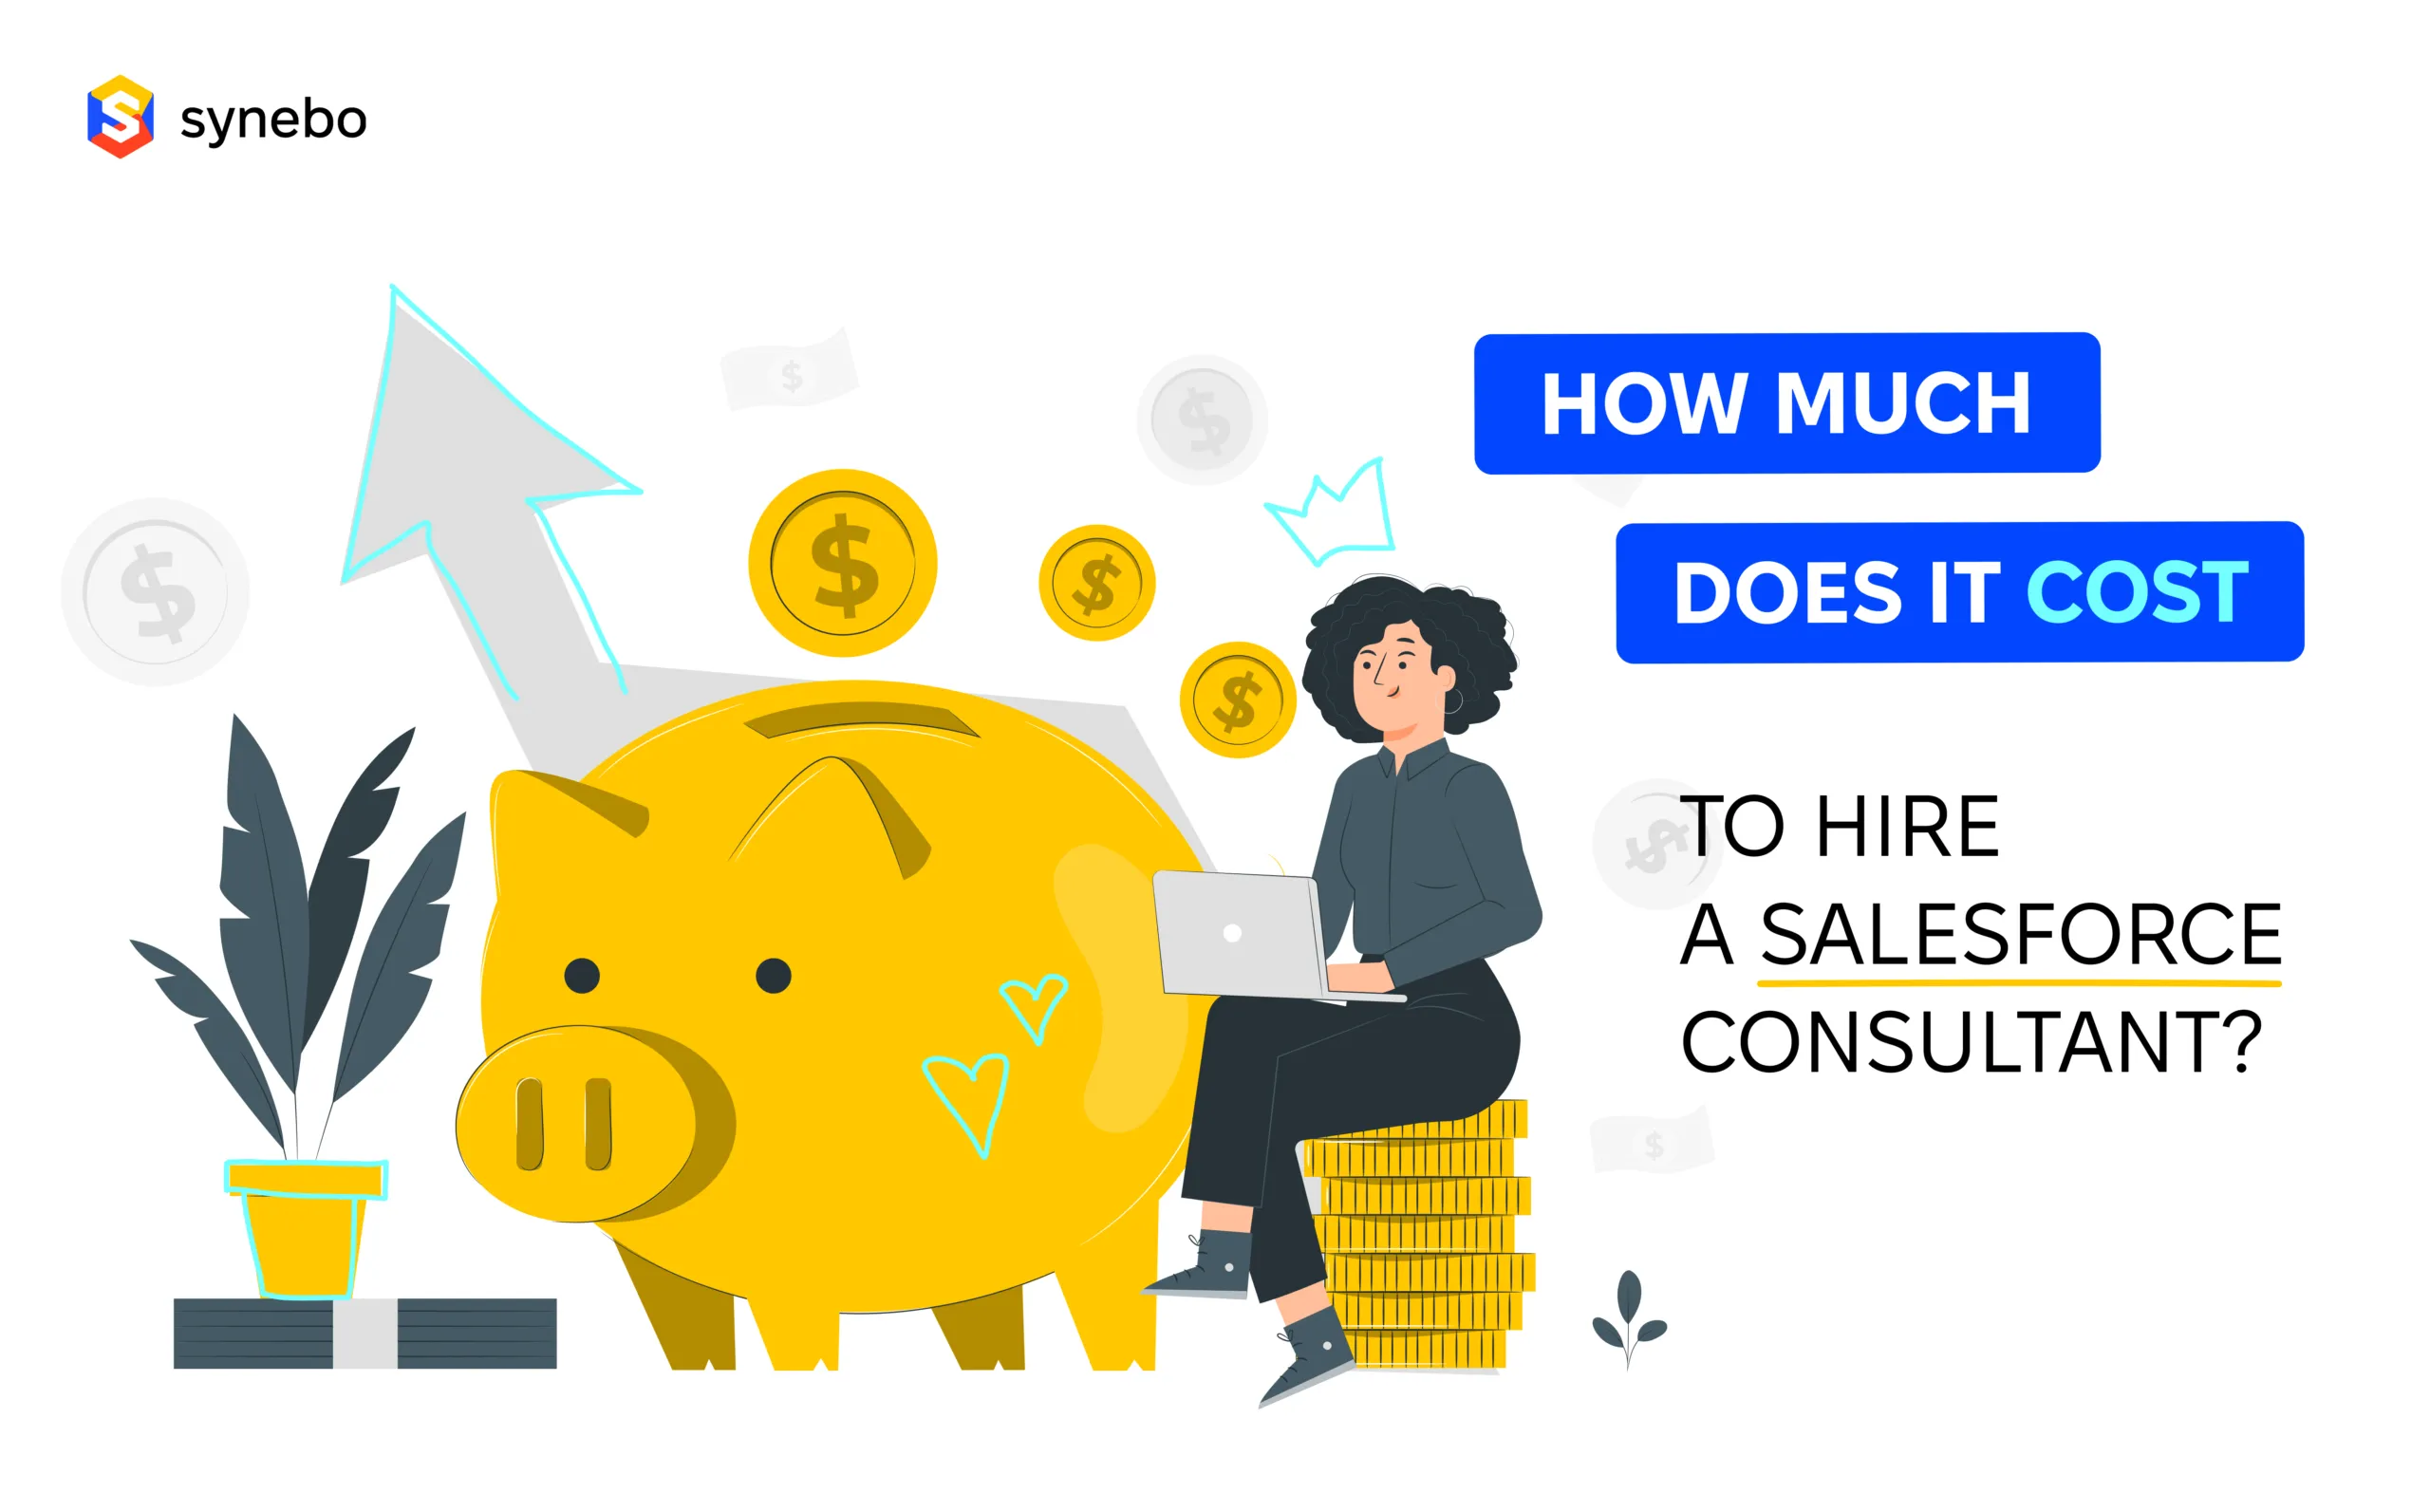 How much does it cost to hire a salesforce consultant